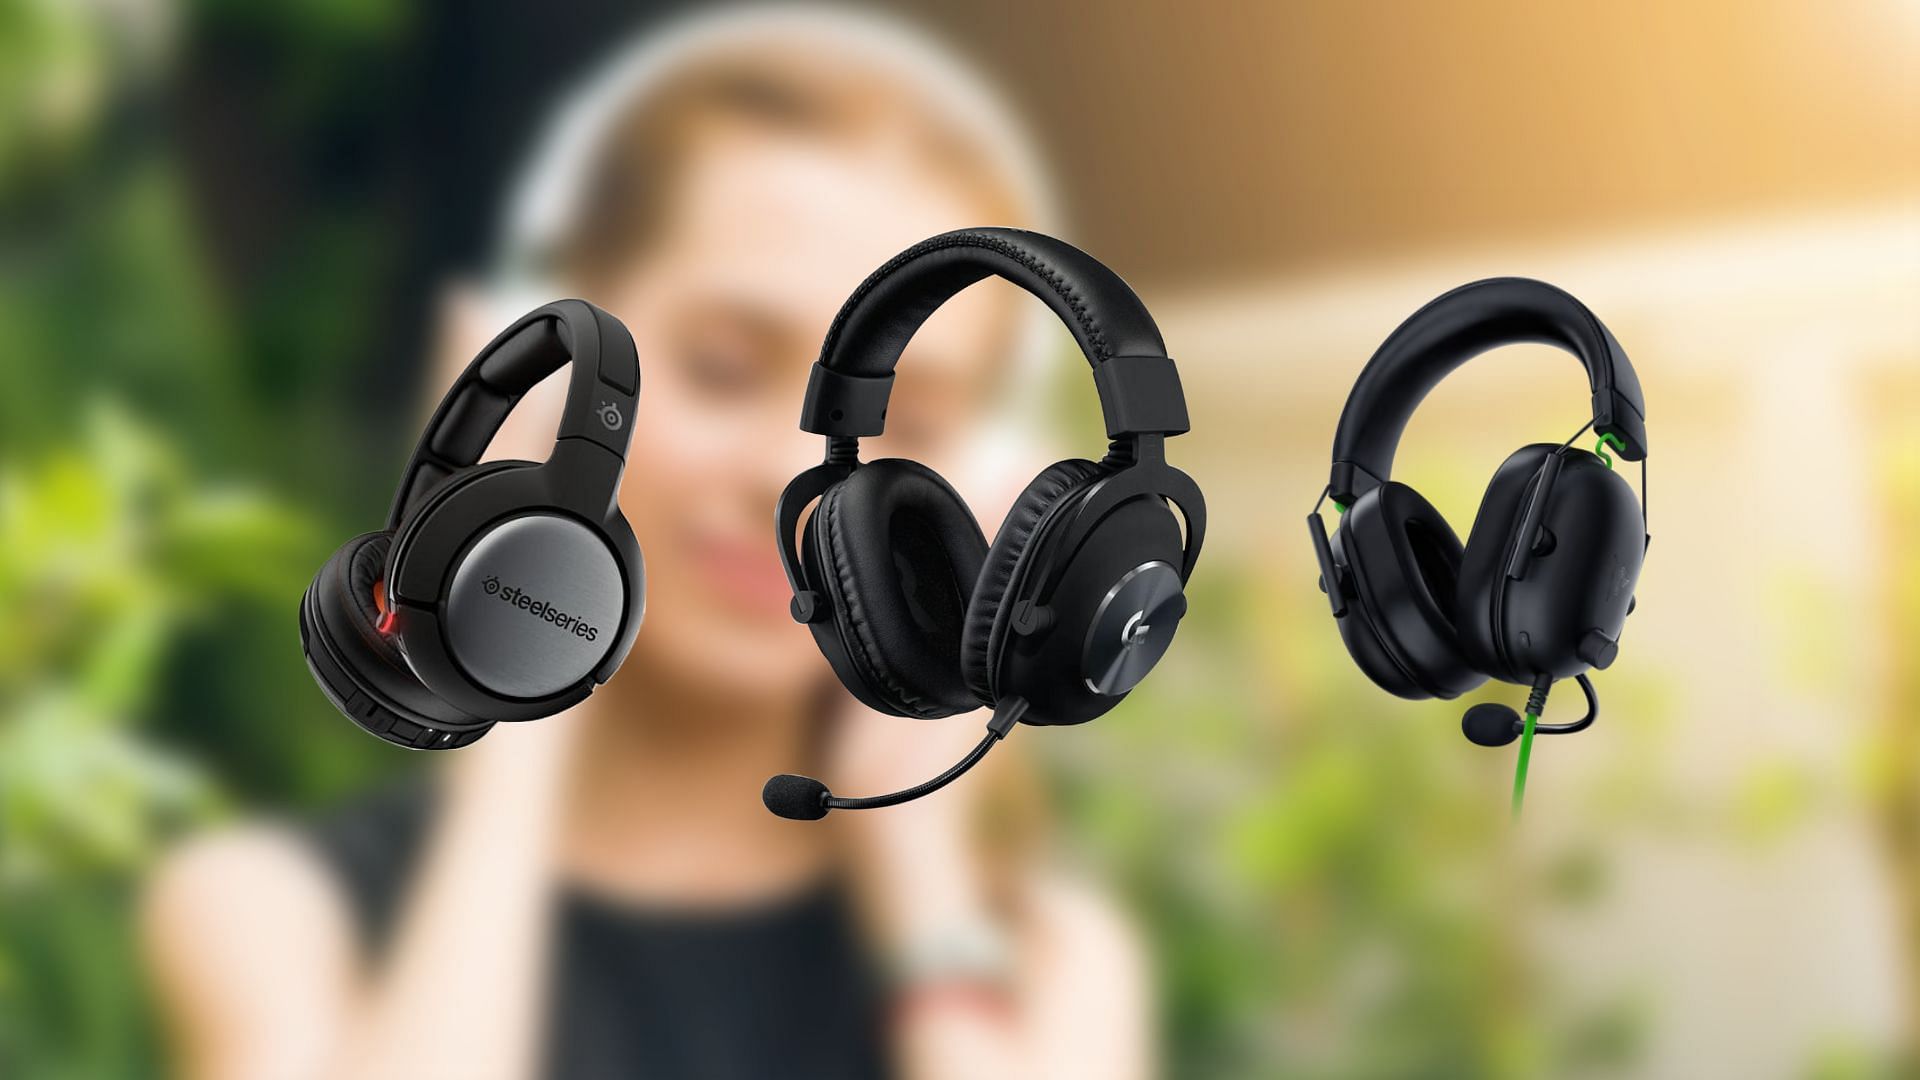 Gaming Headsets, Headphones: Wireless, Wired, Immersive Audio